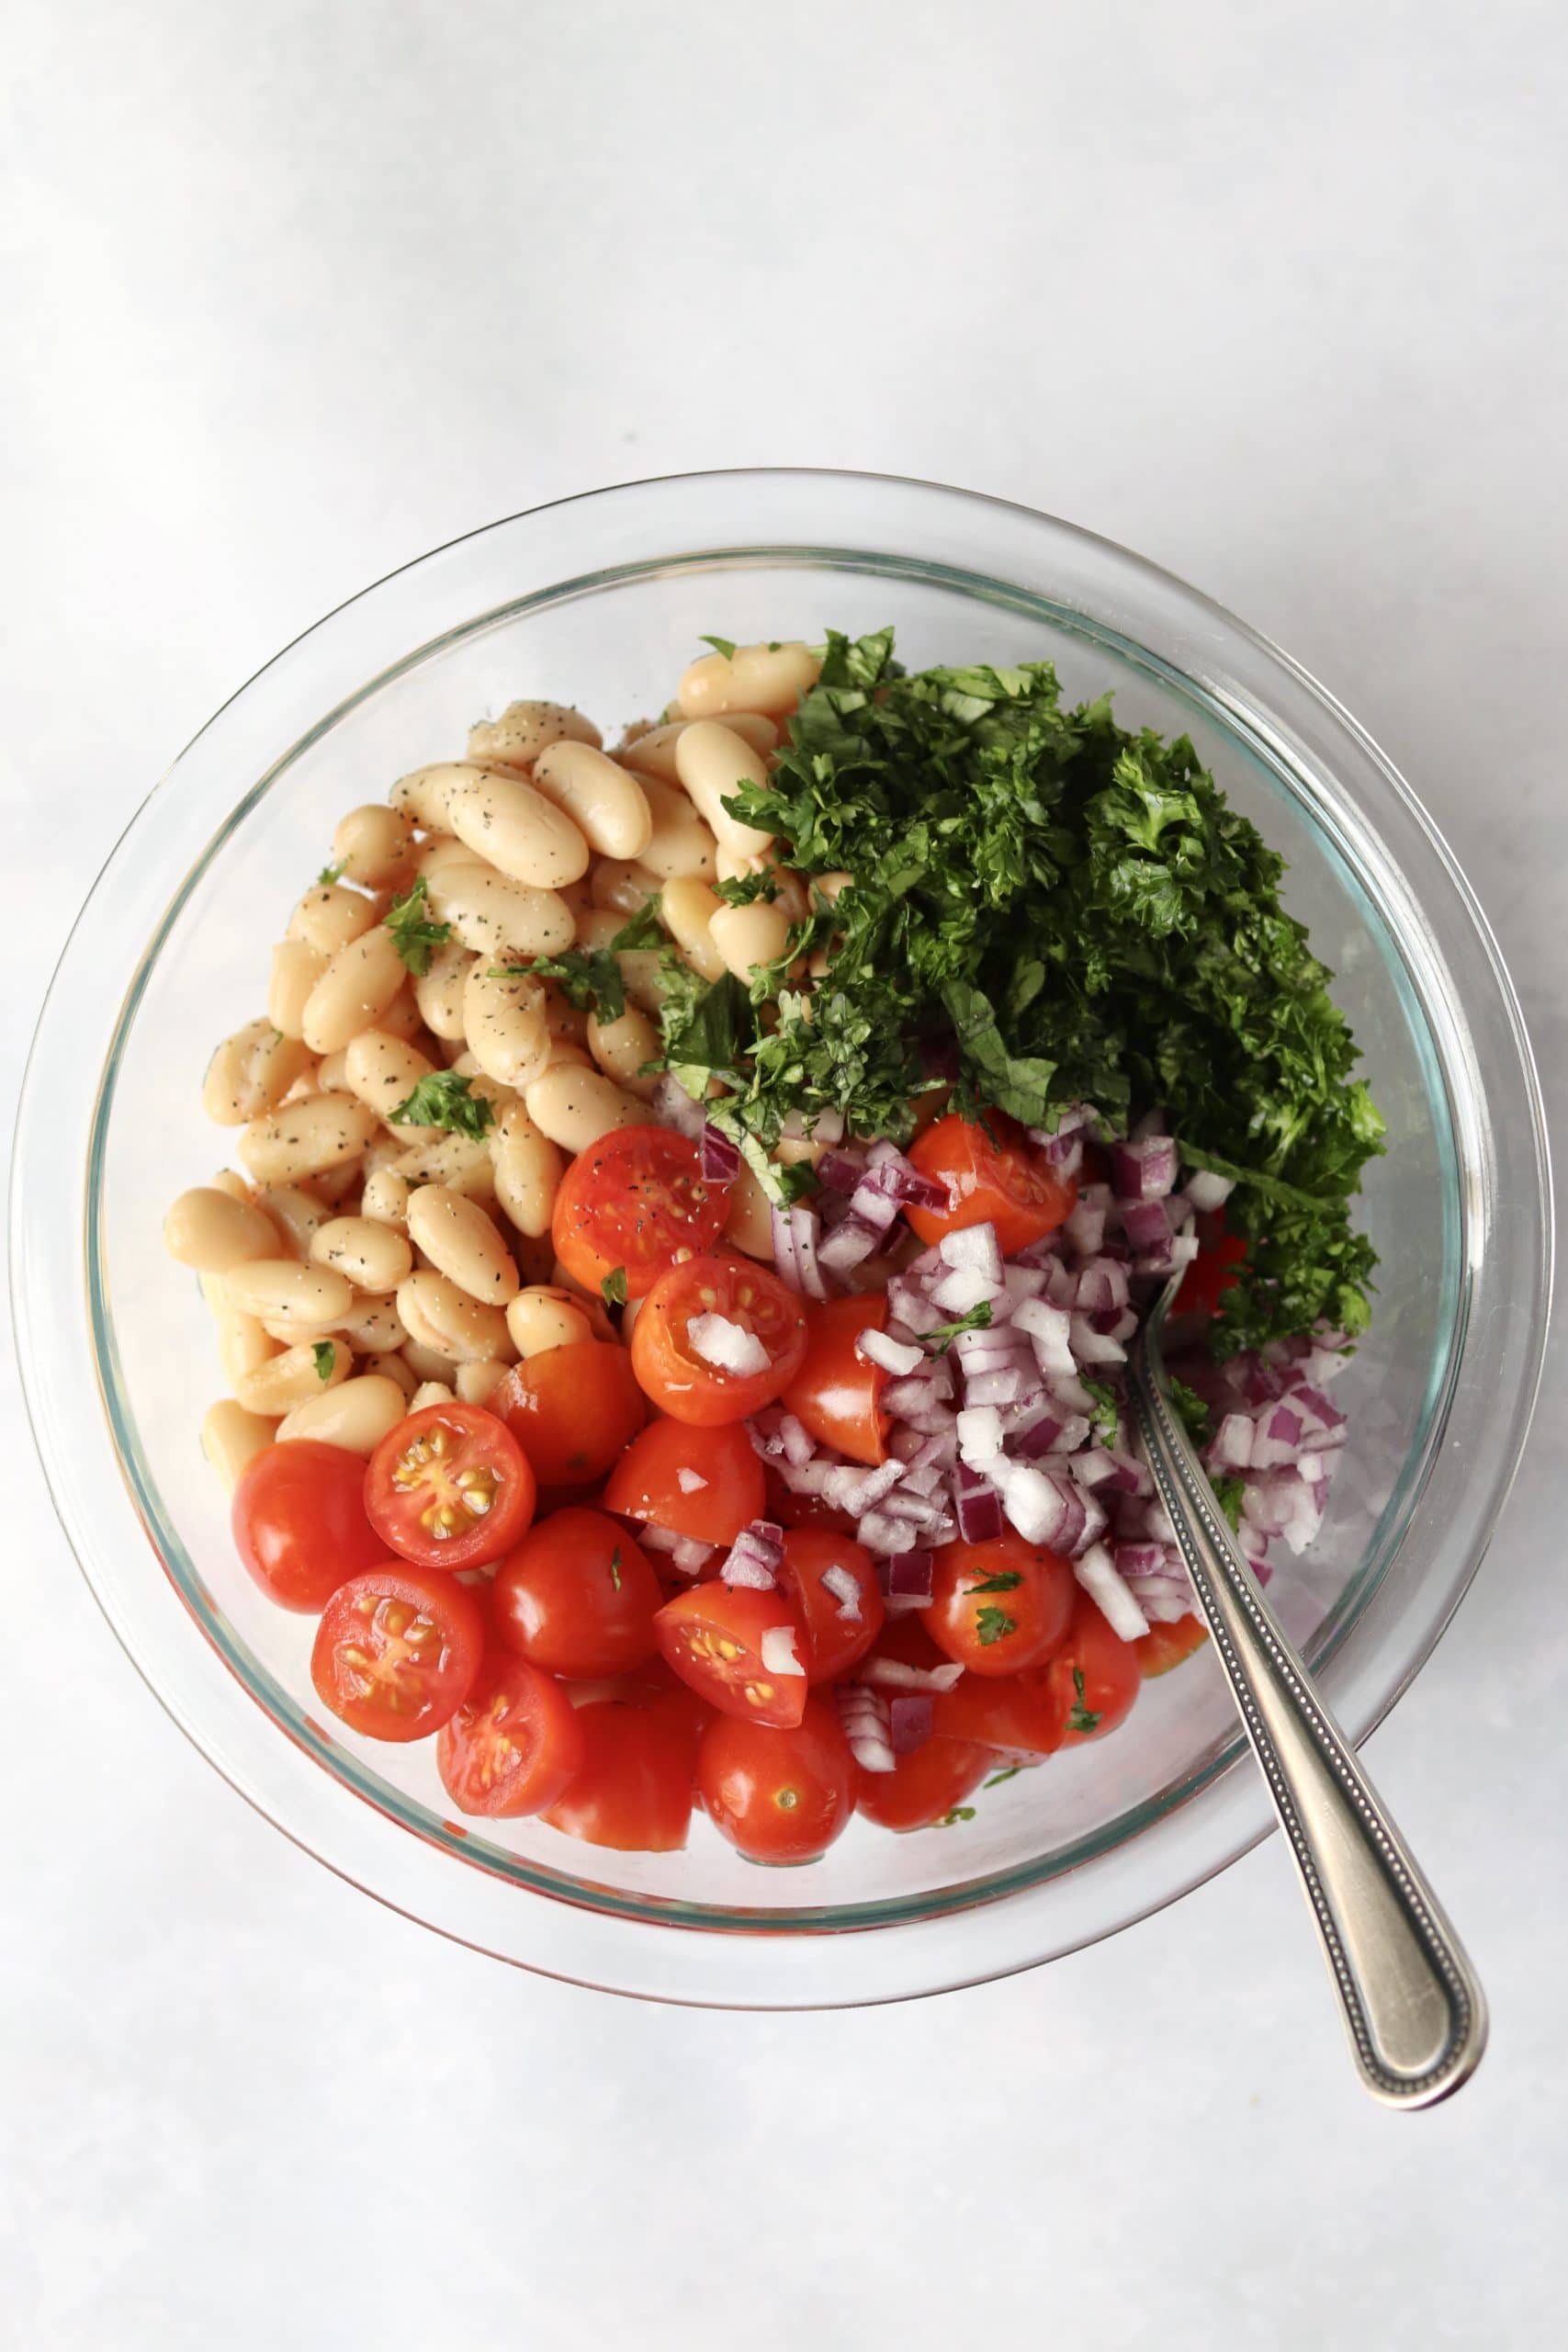 White beans, tomatoes, red onion, and herbs in bowl